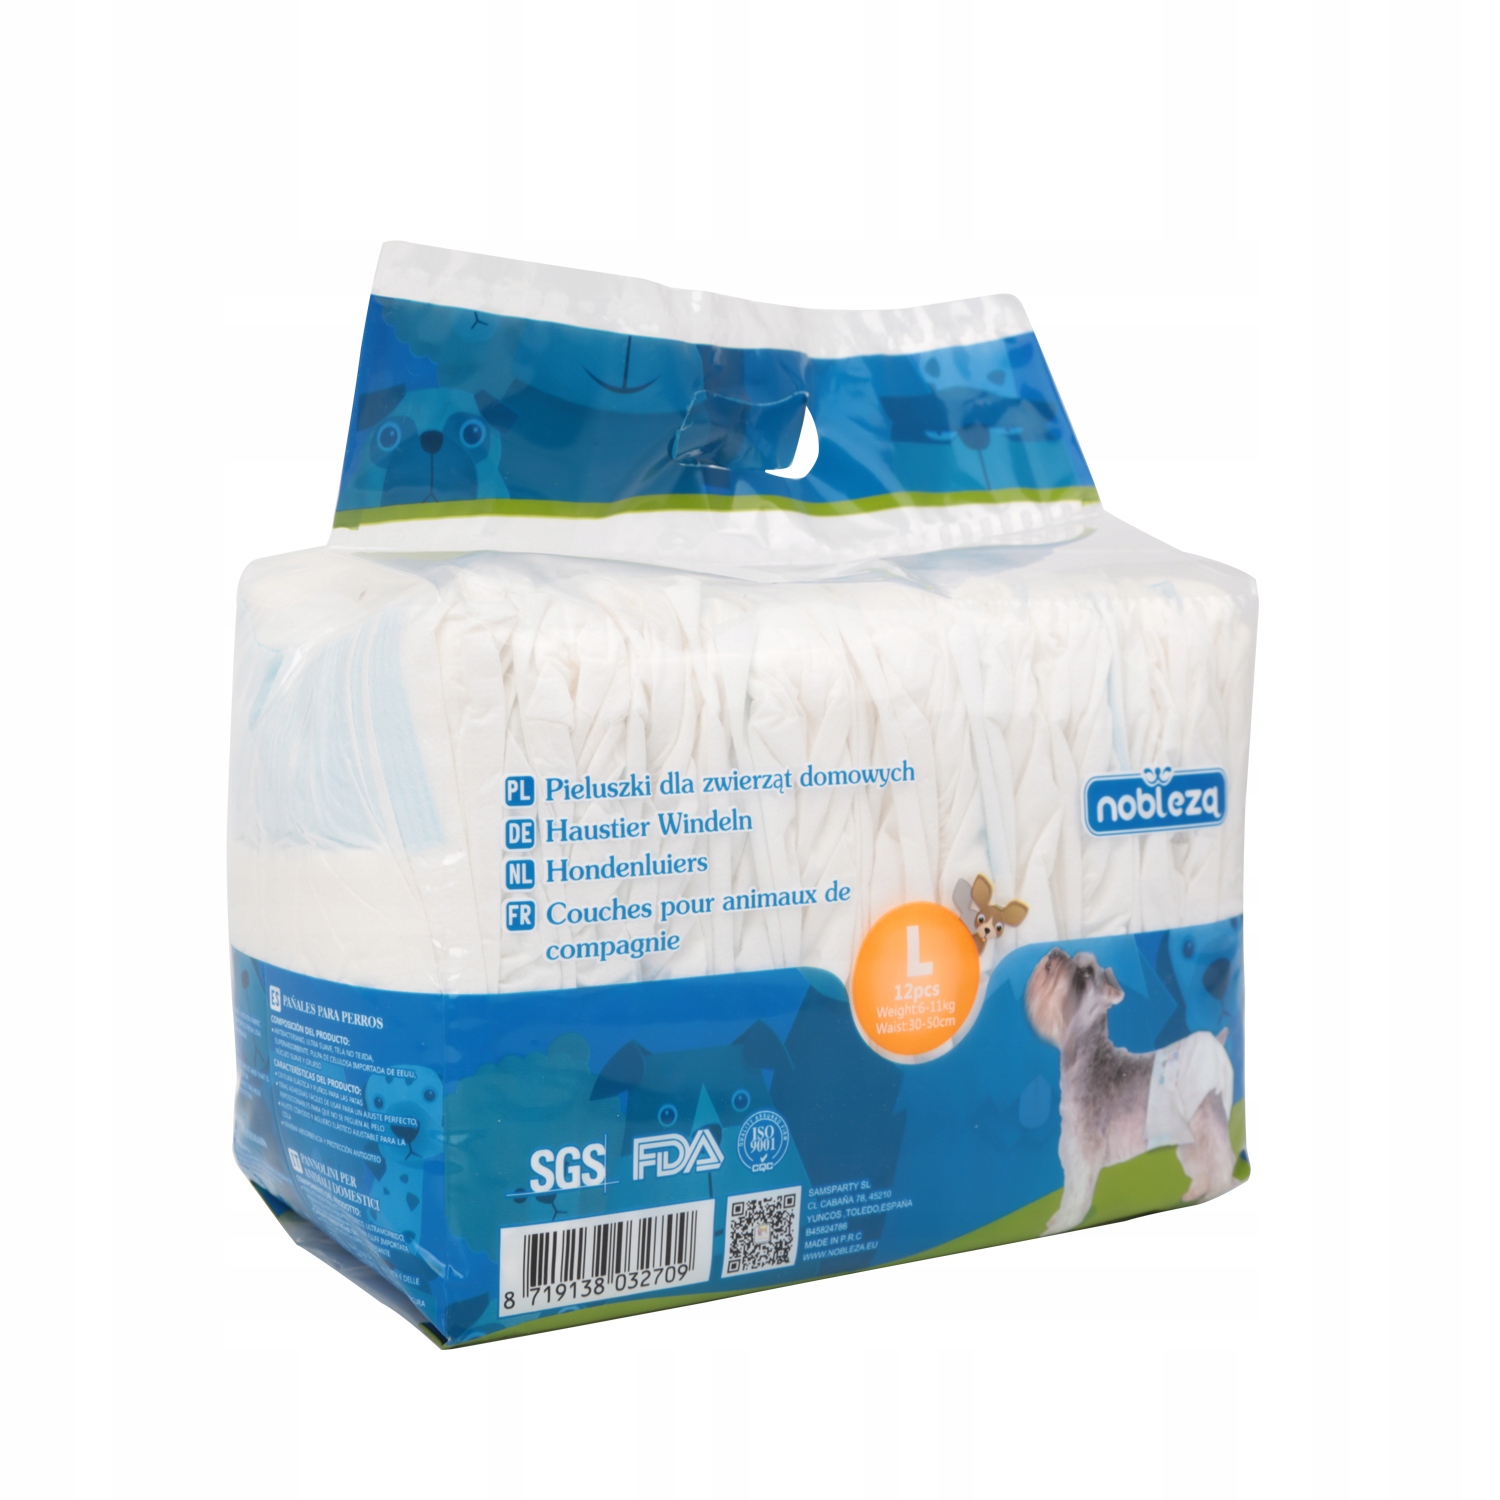 pampers 136